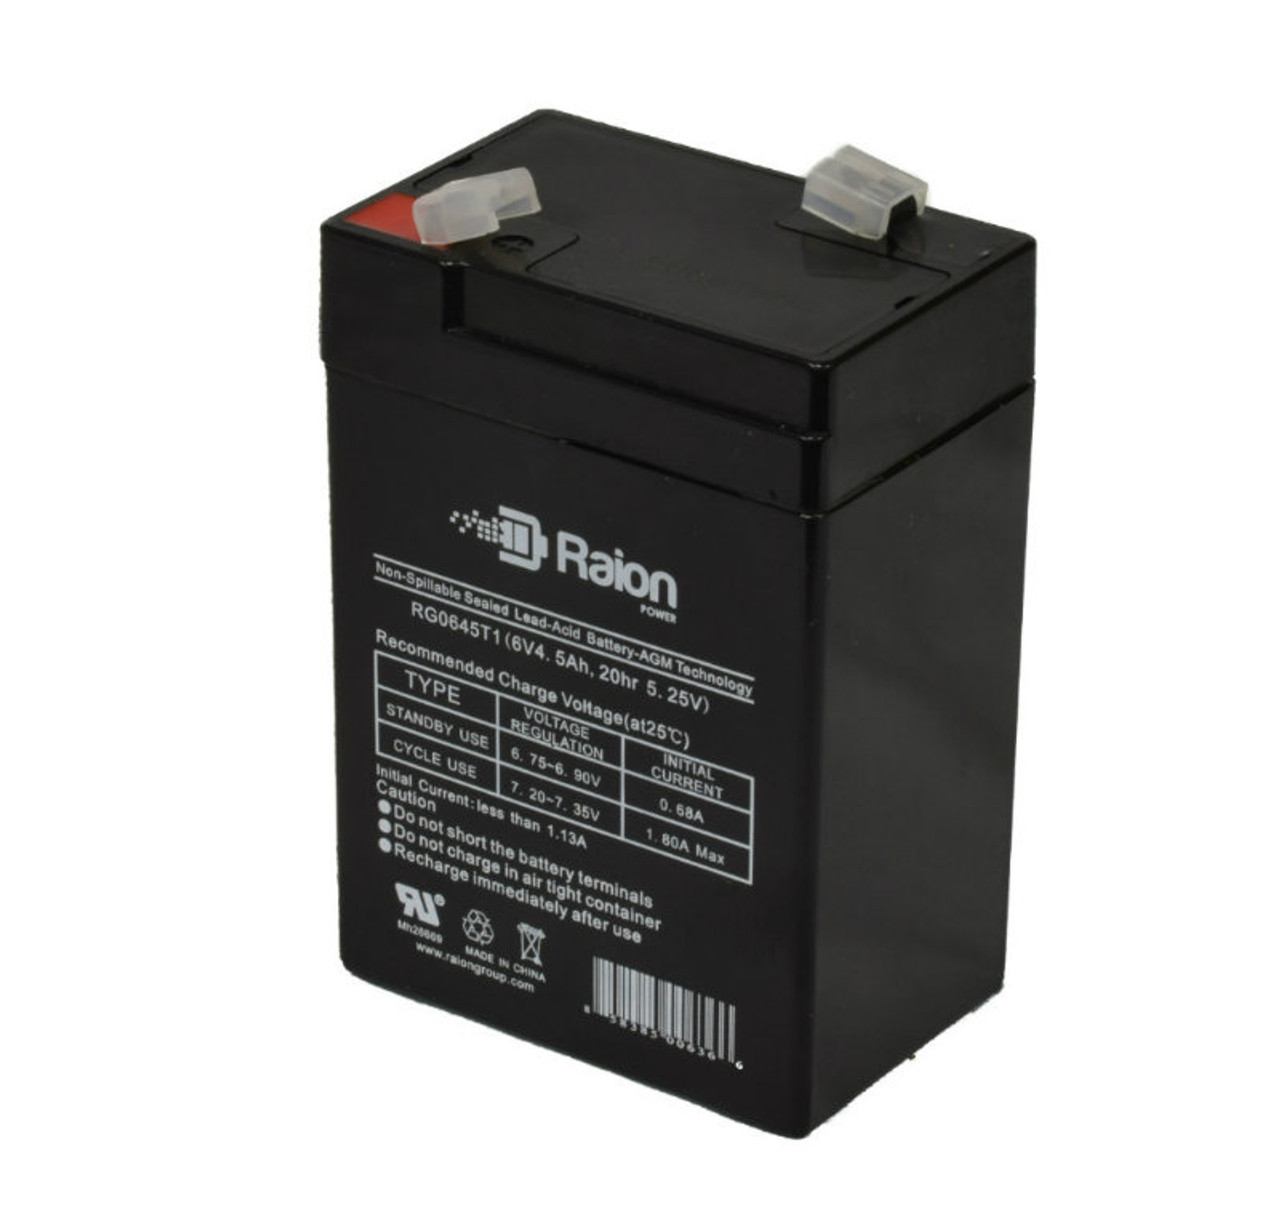 Raion Power RG0645T1 6V 4.5Ah Replacement Battery Cartridge for National Power GS012P3-LL